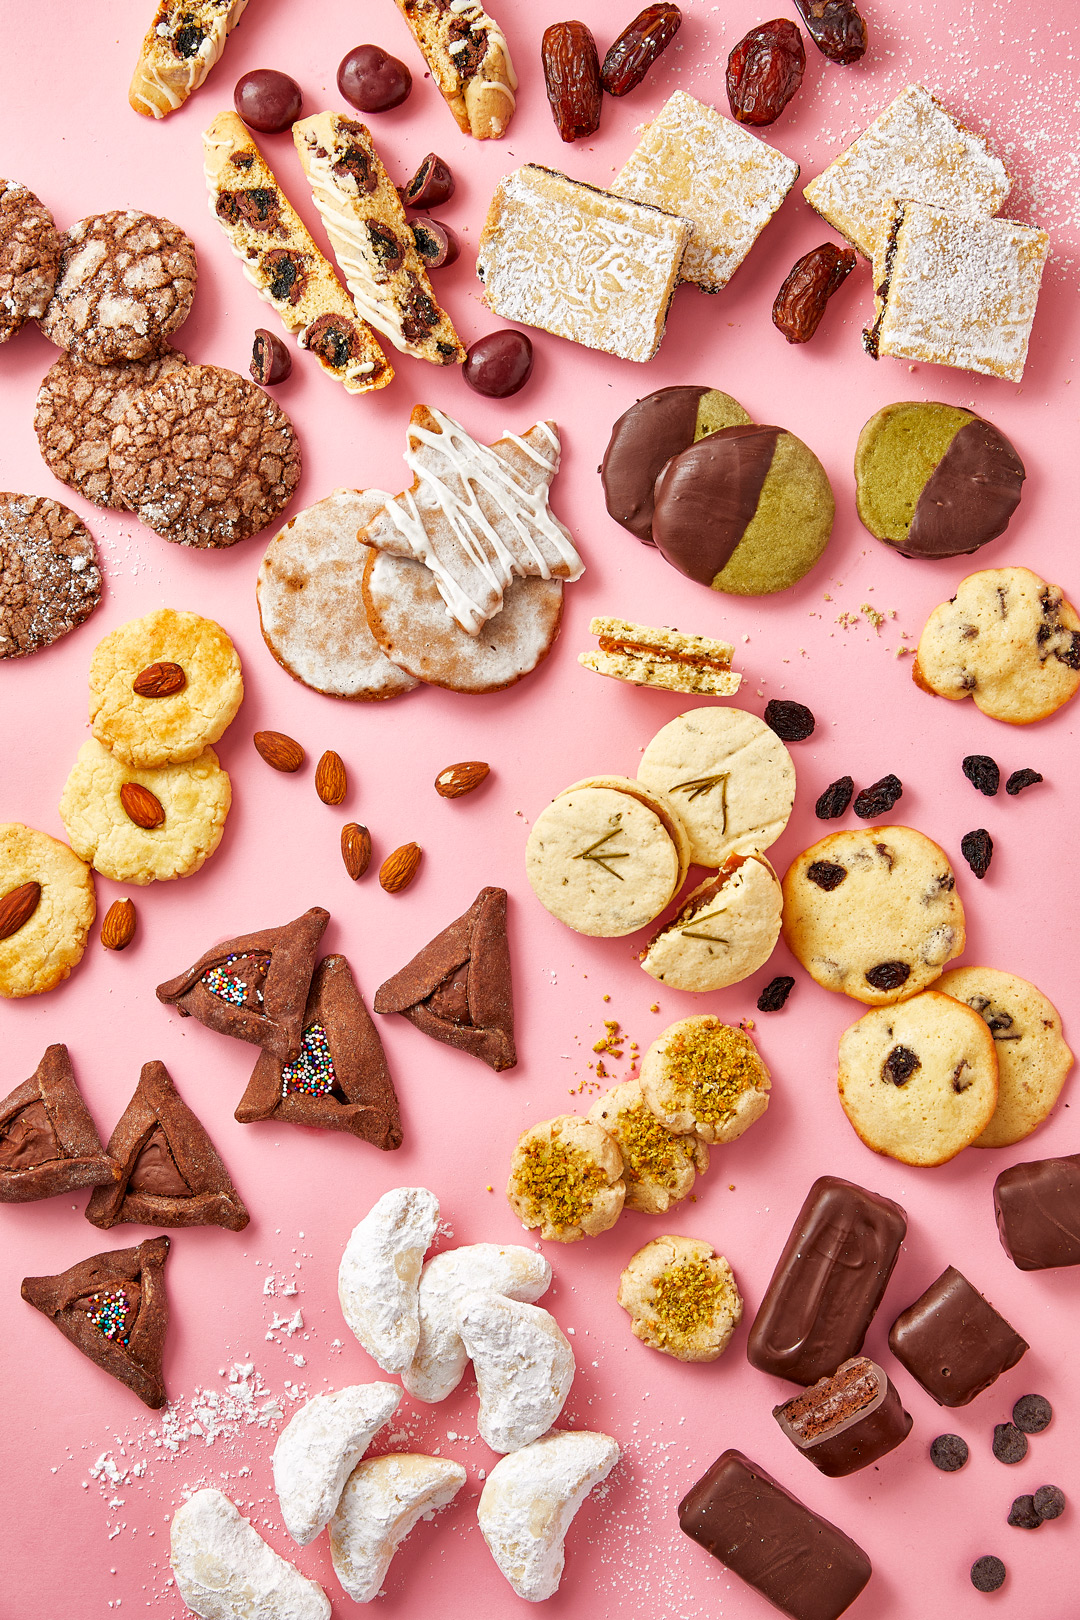 12 cookies from around the world